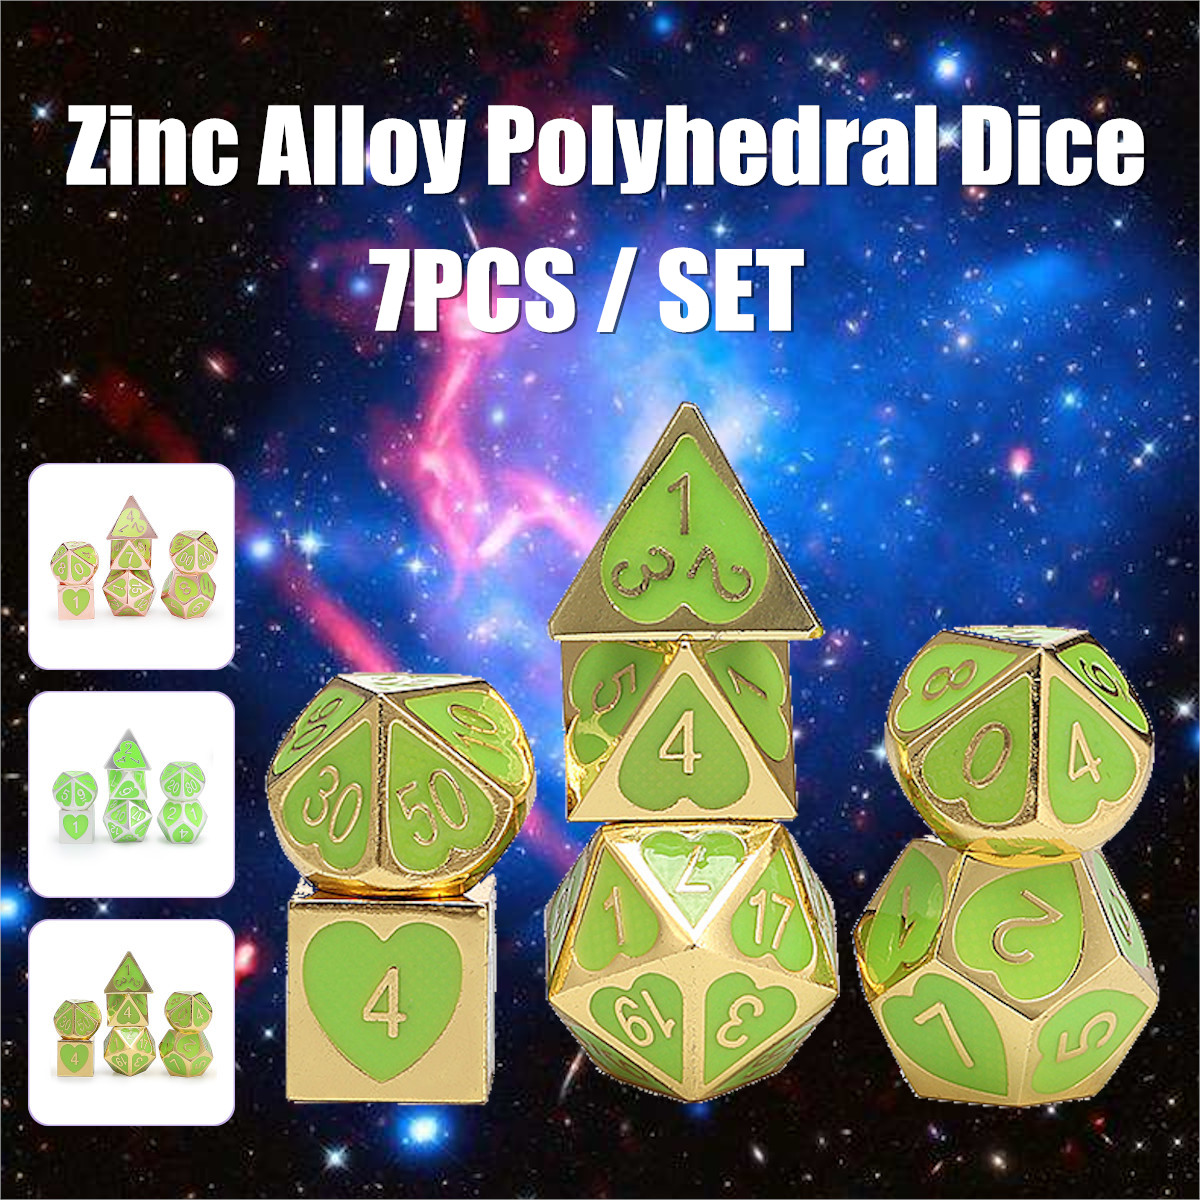 7PcsSet-Zinc-Alloy-Polyhedral-Dices-Role-Playing-Games-Accessories-DND-Dices-1646833-1